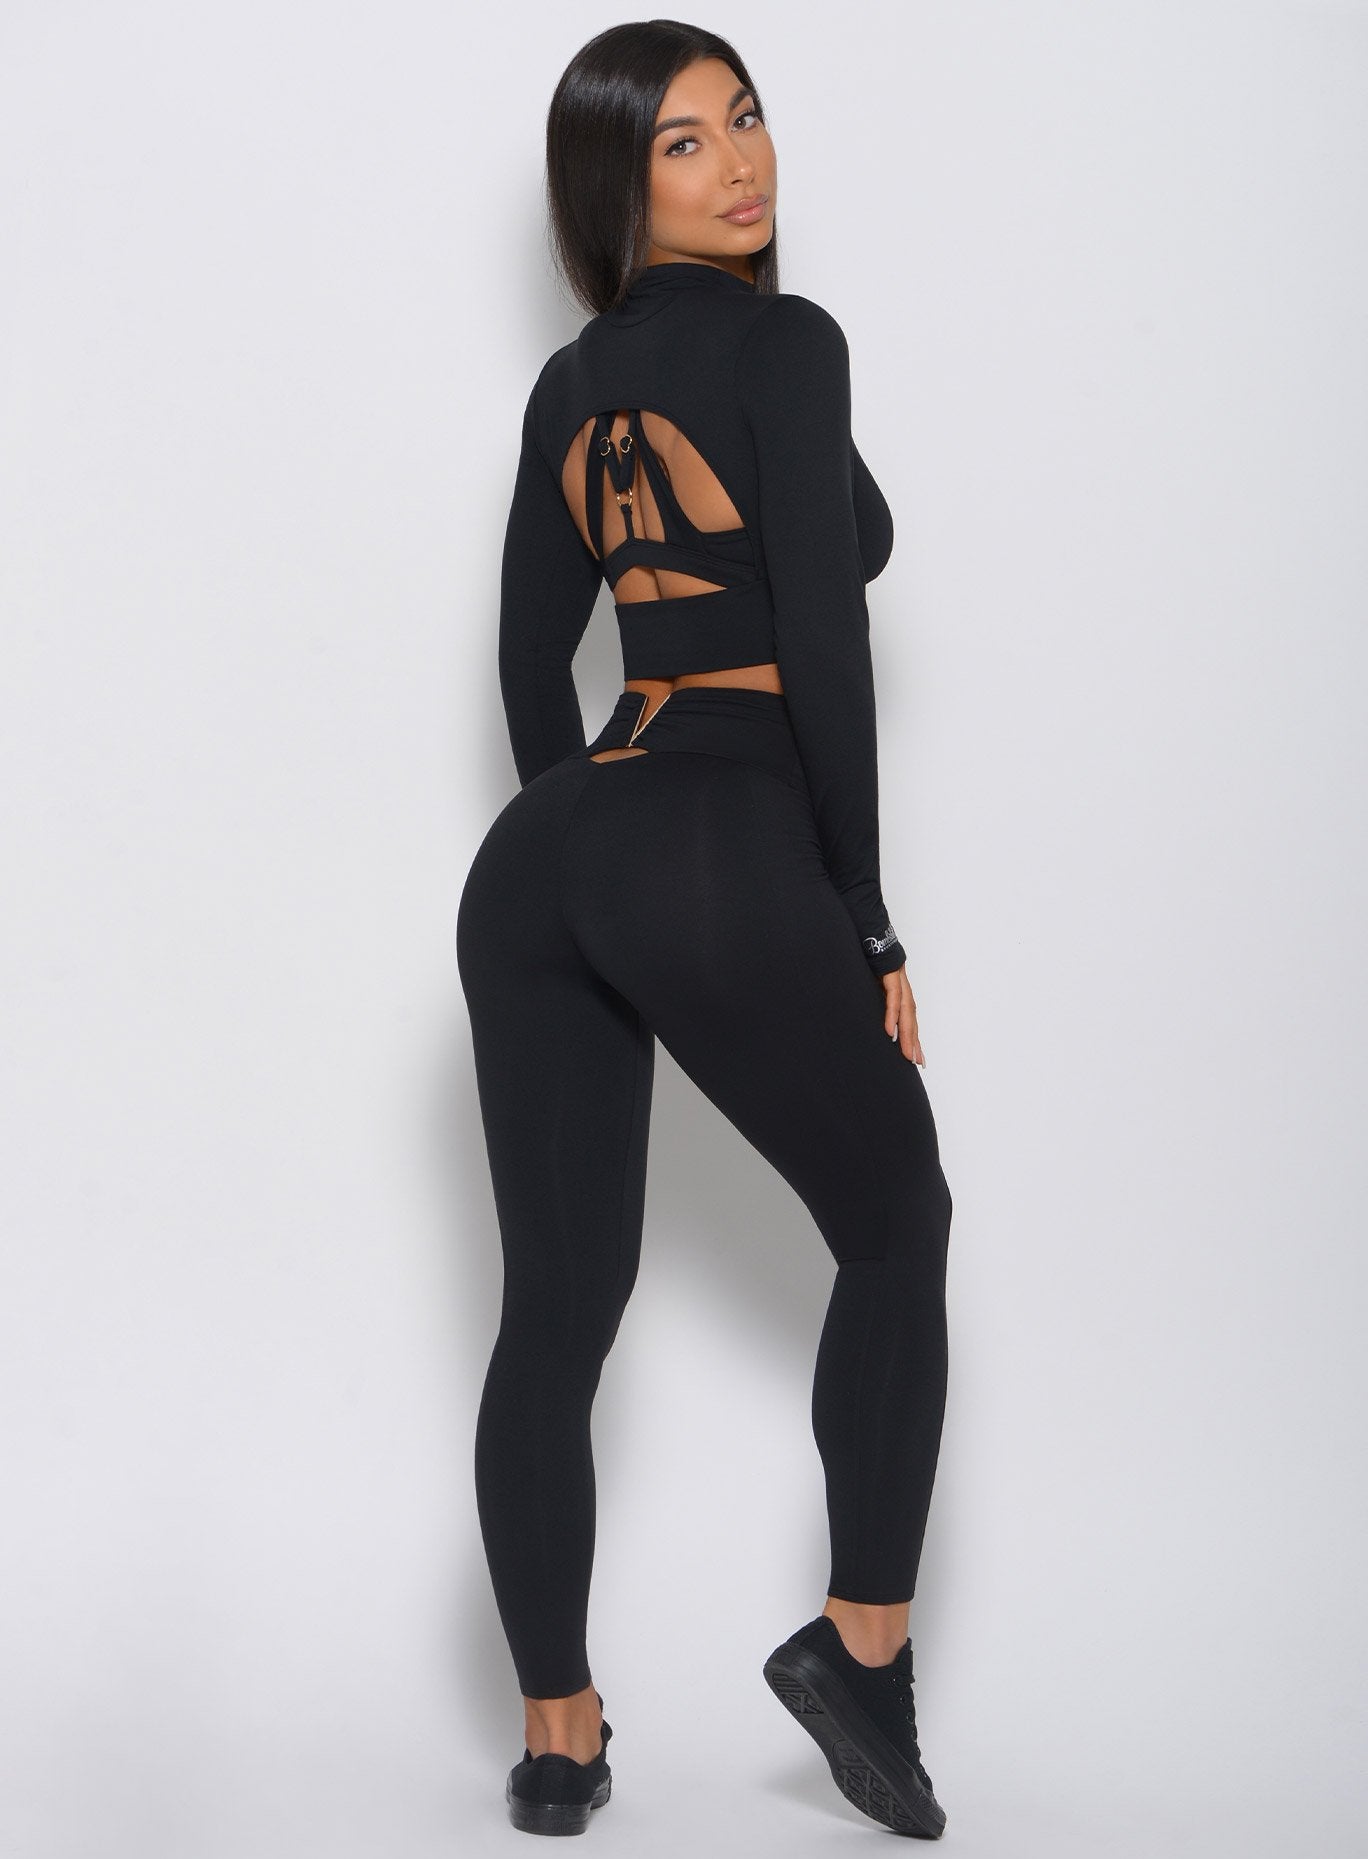 Back view of the model in a black leggings with a V back design 